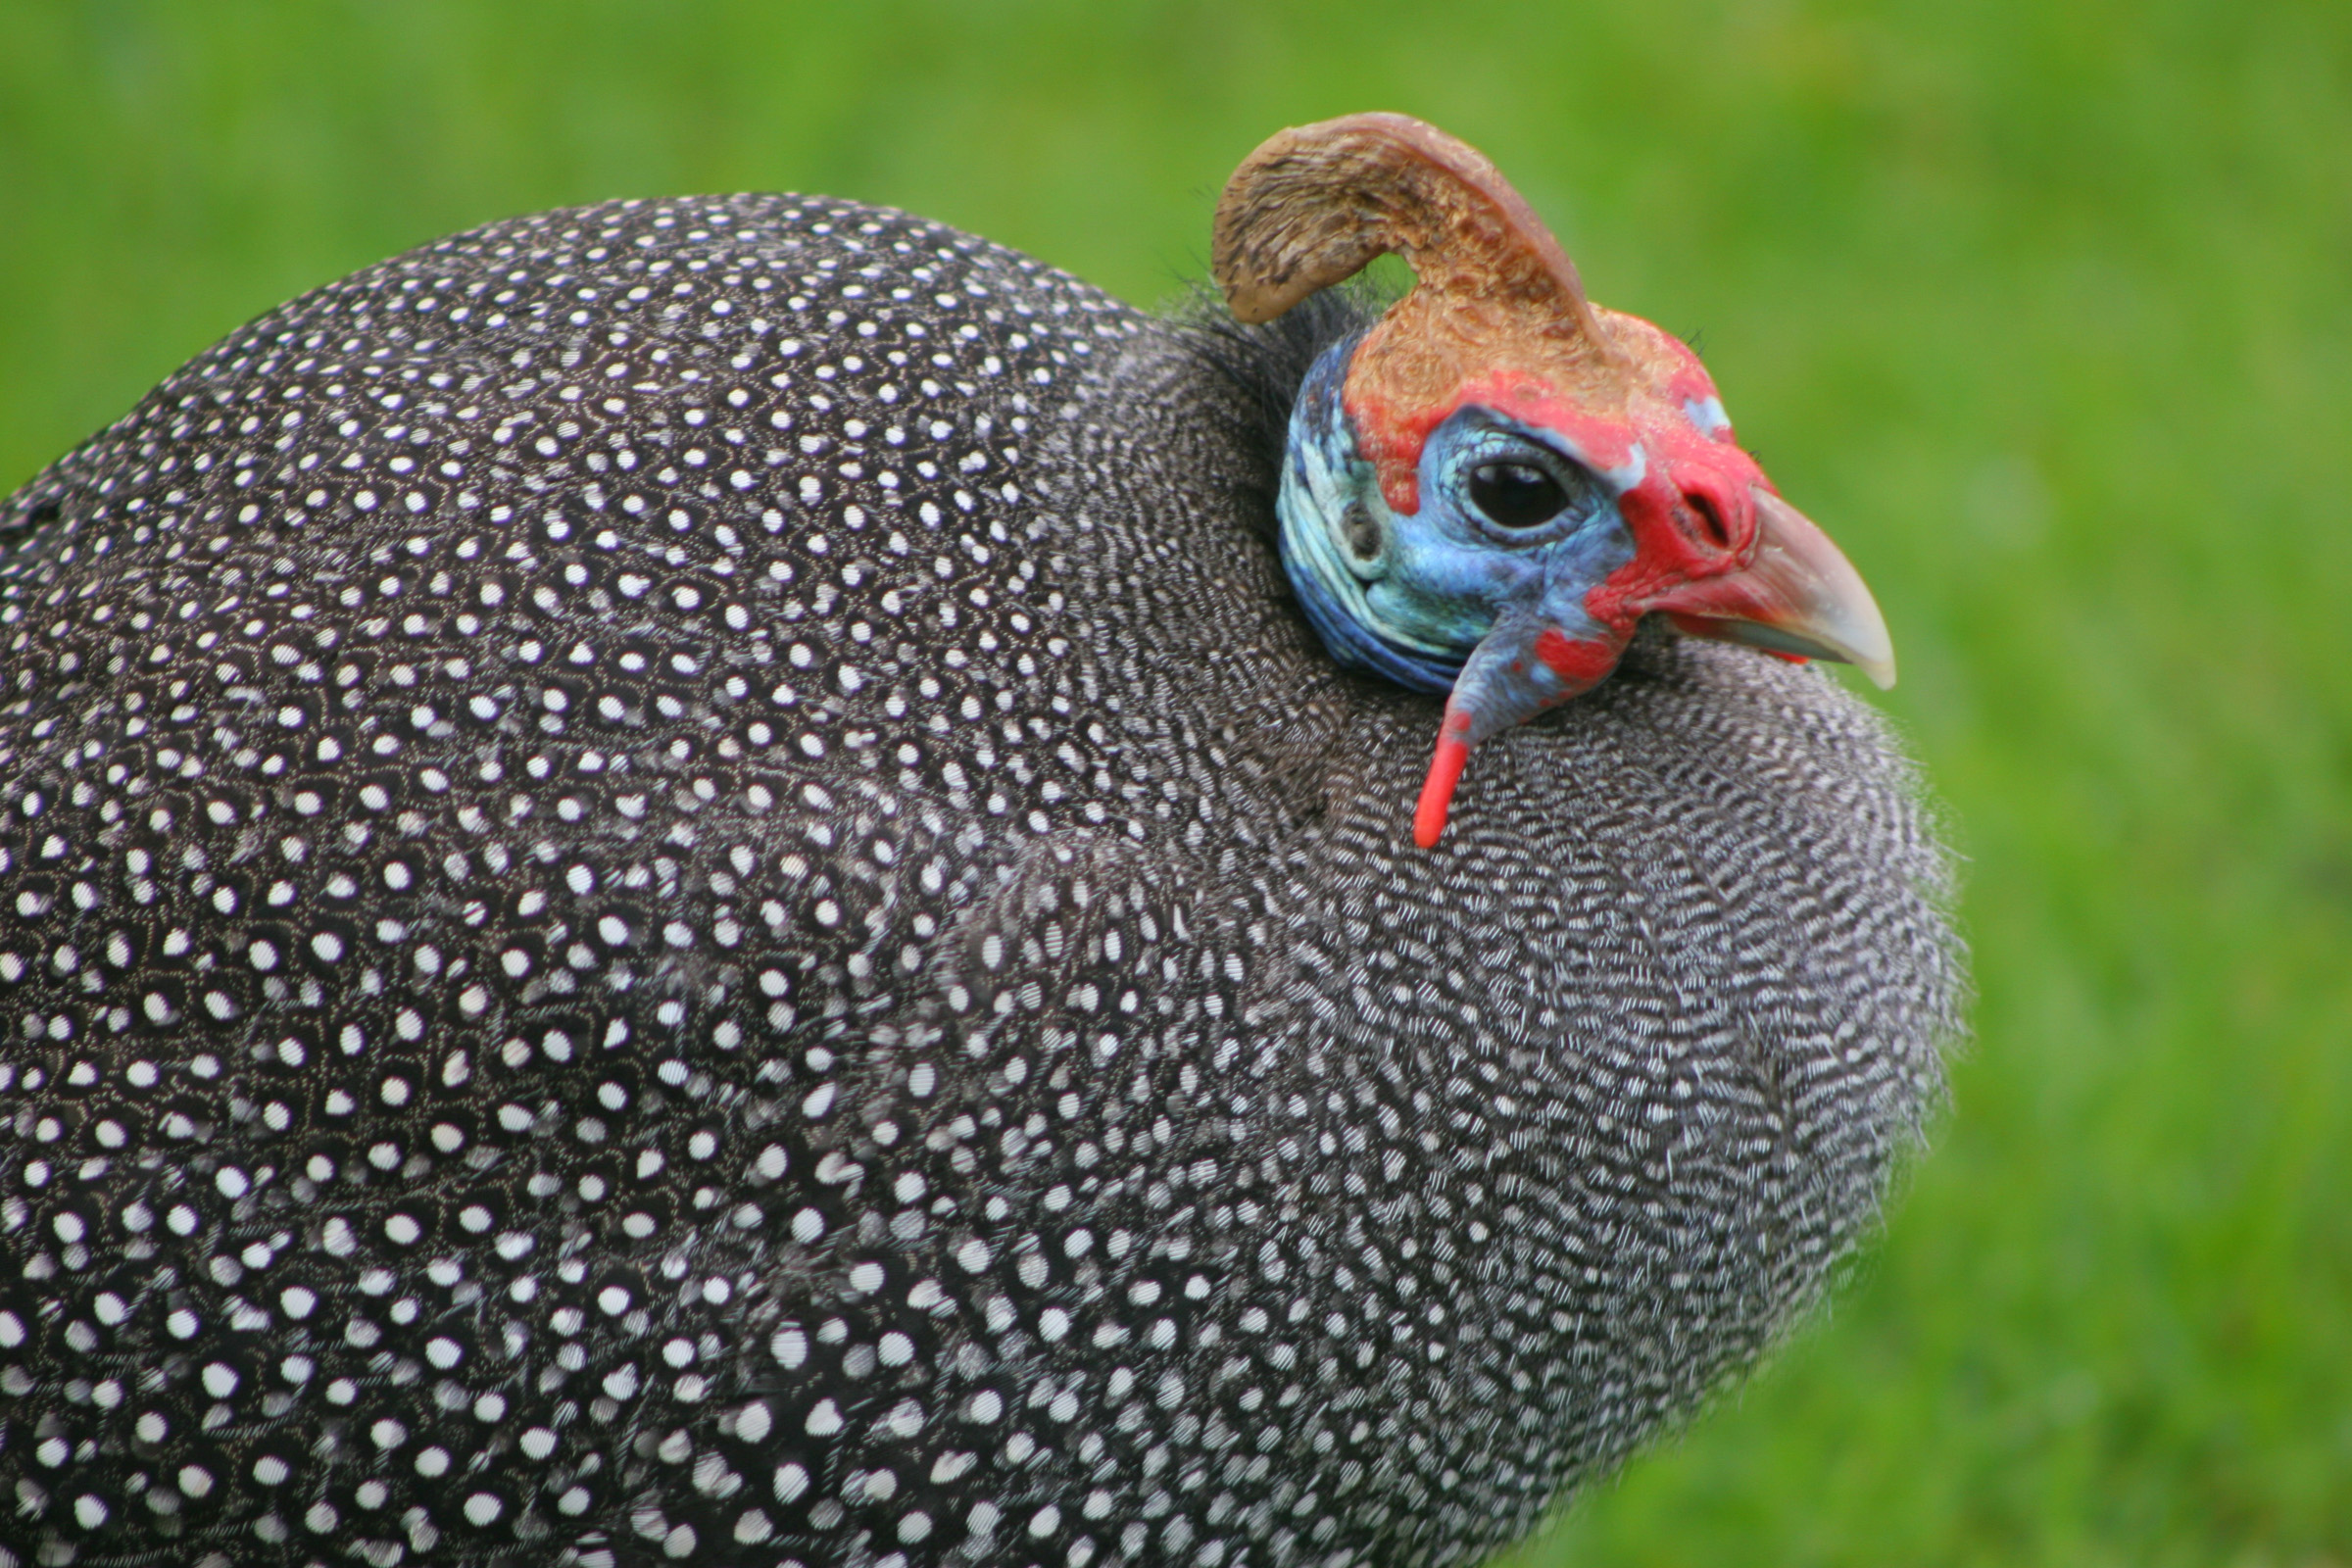 A helmeted guineafowl. A Turkish biologist at the University of Utah questions Turkey’s use of the birds to control ticks that spread Crimean-Congo hemorrhagic fever, contending the birds instead may help spread the disease.